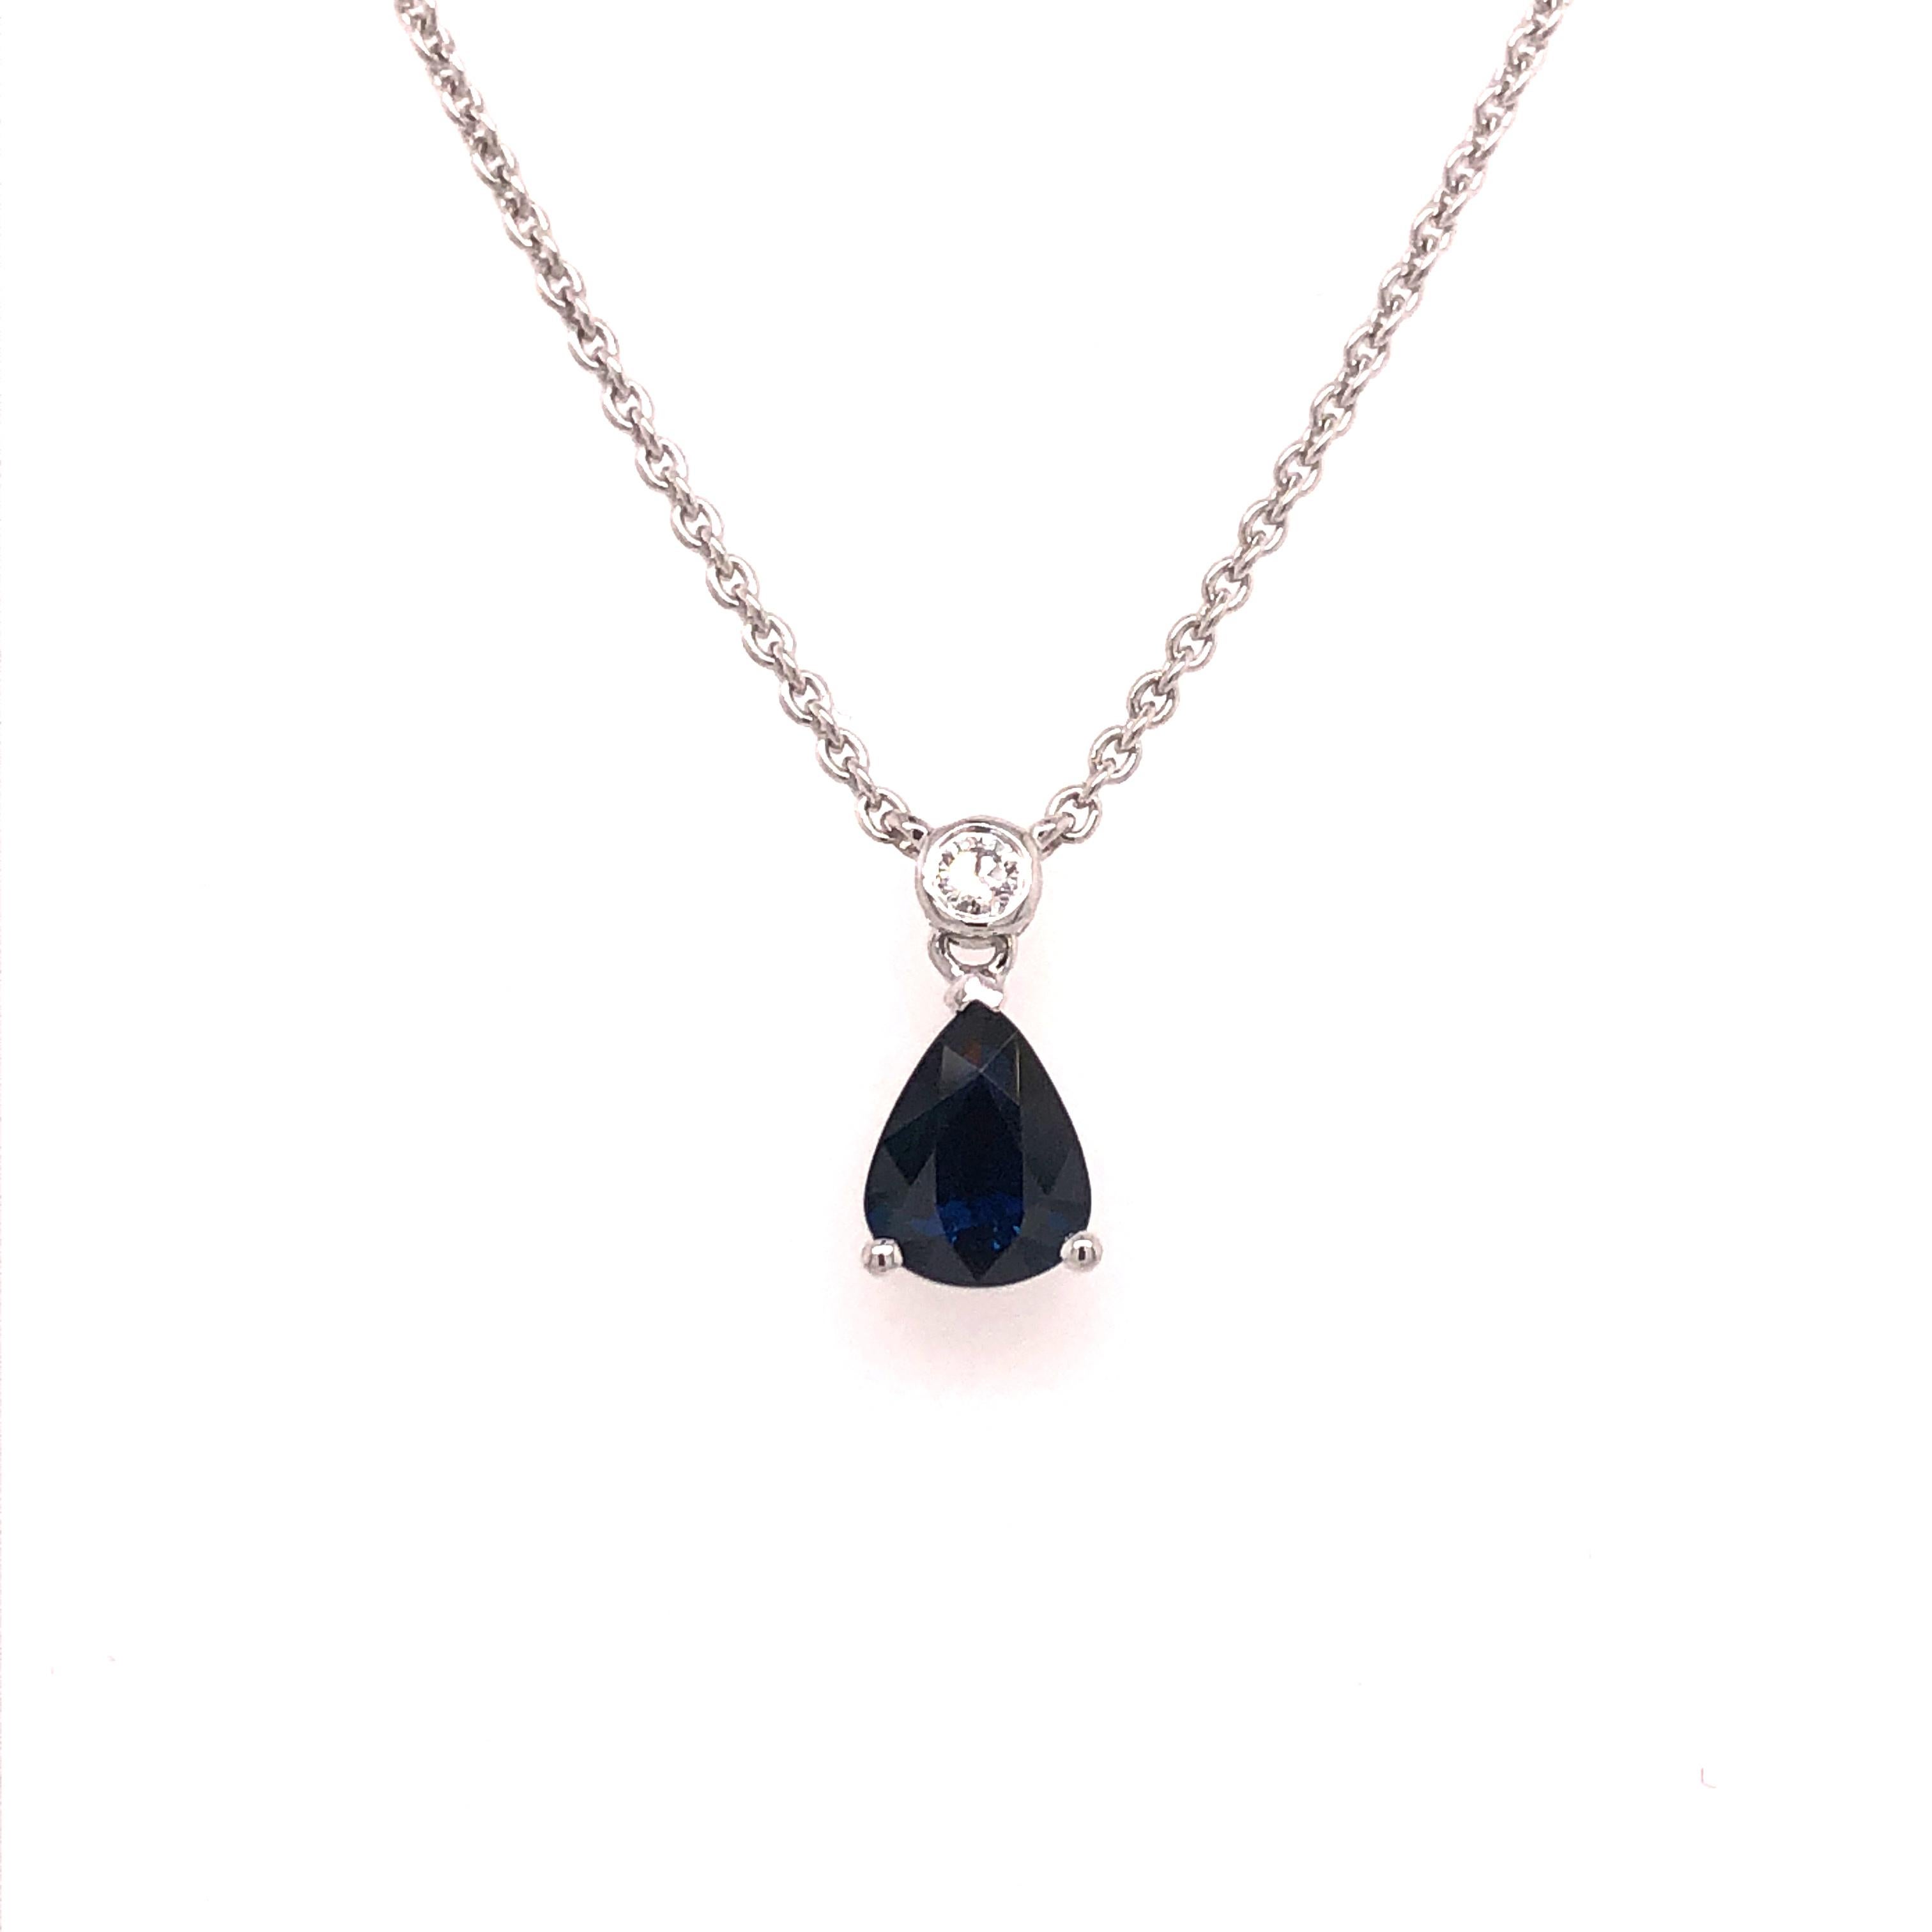 A gentle kiss of color, this deep blue sapphire necklace is the perfect gift. The 1.15 CT pear shaped Sapphire drops from a 0.05 CT round diamond all set in 18K white gold. 

17